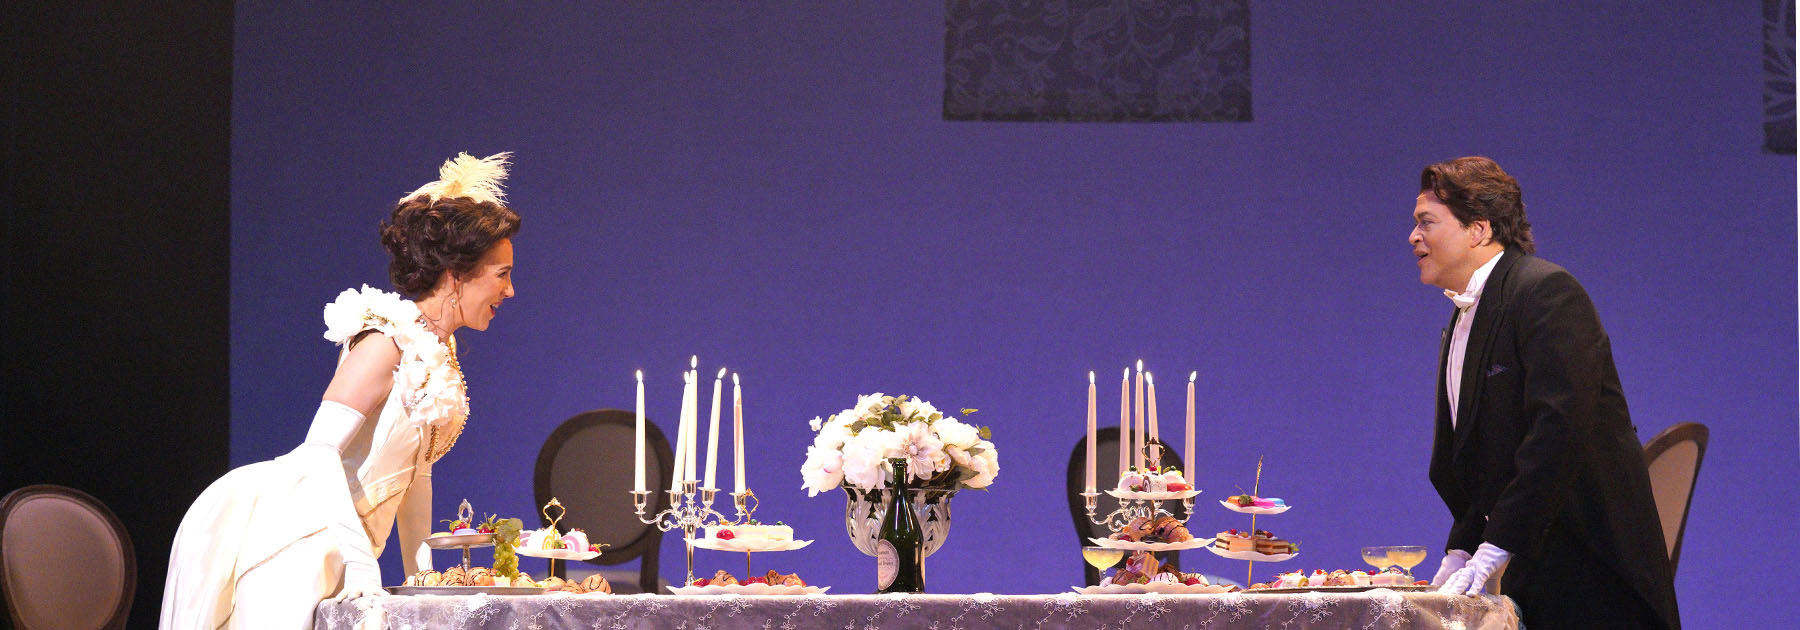 image from a performance of a couple sitting at opposite ends of a dining table